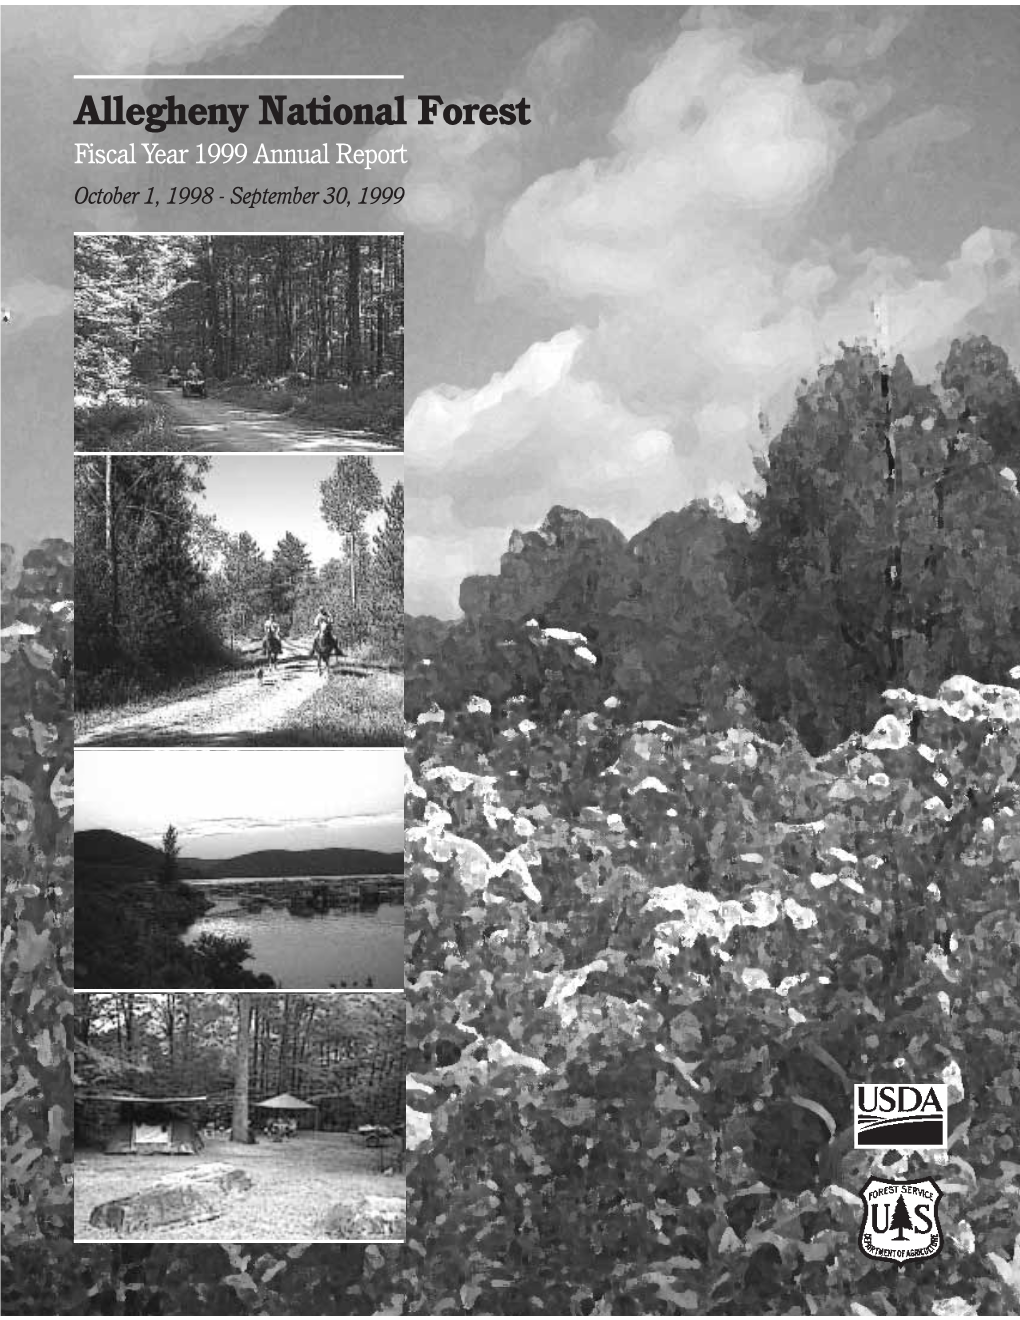 Allegheny National Forest Fiscal Year 1999 Annual Report October 1, 1998 - September 30, 1999 2 Caring for the Land and Serving People Allegheny National Forest